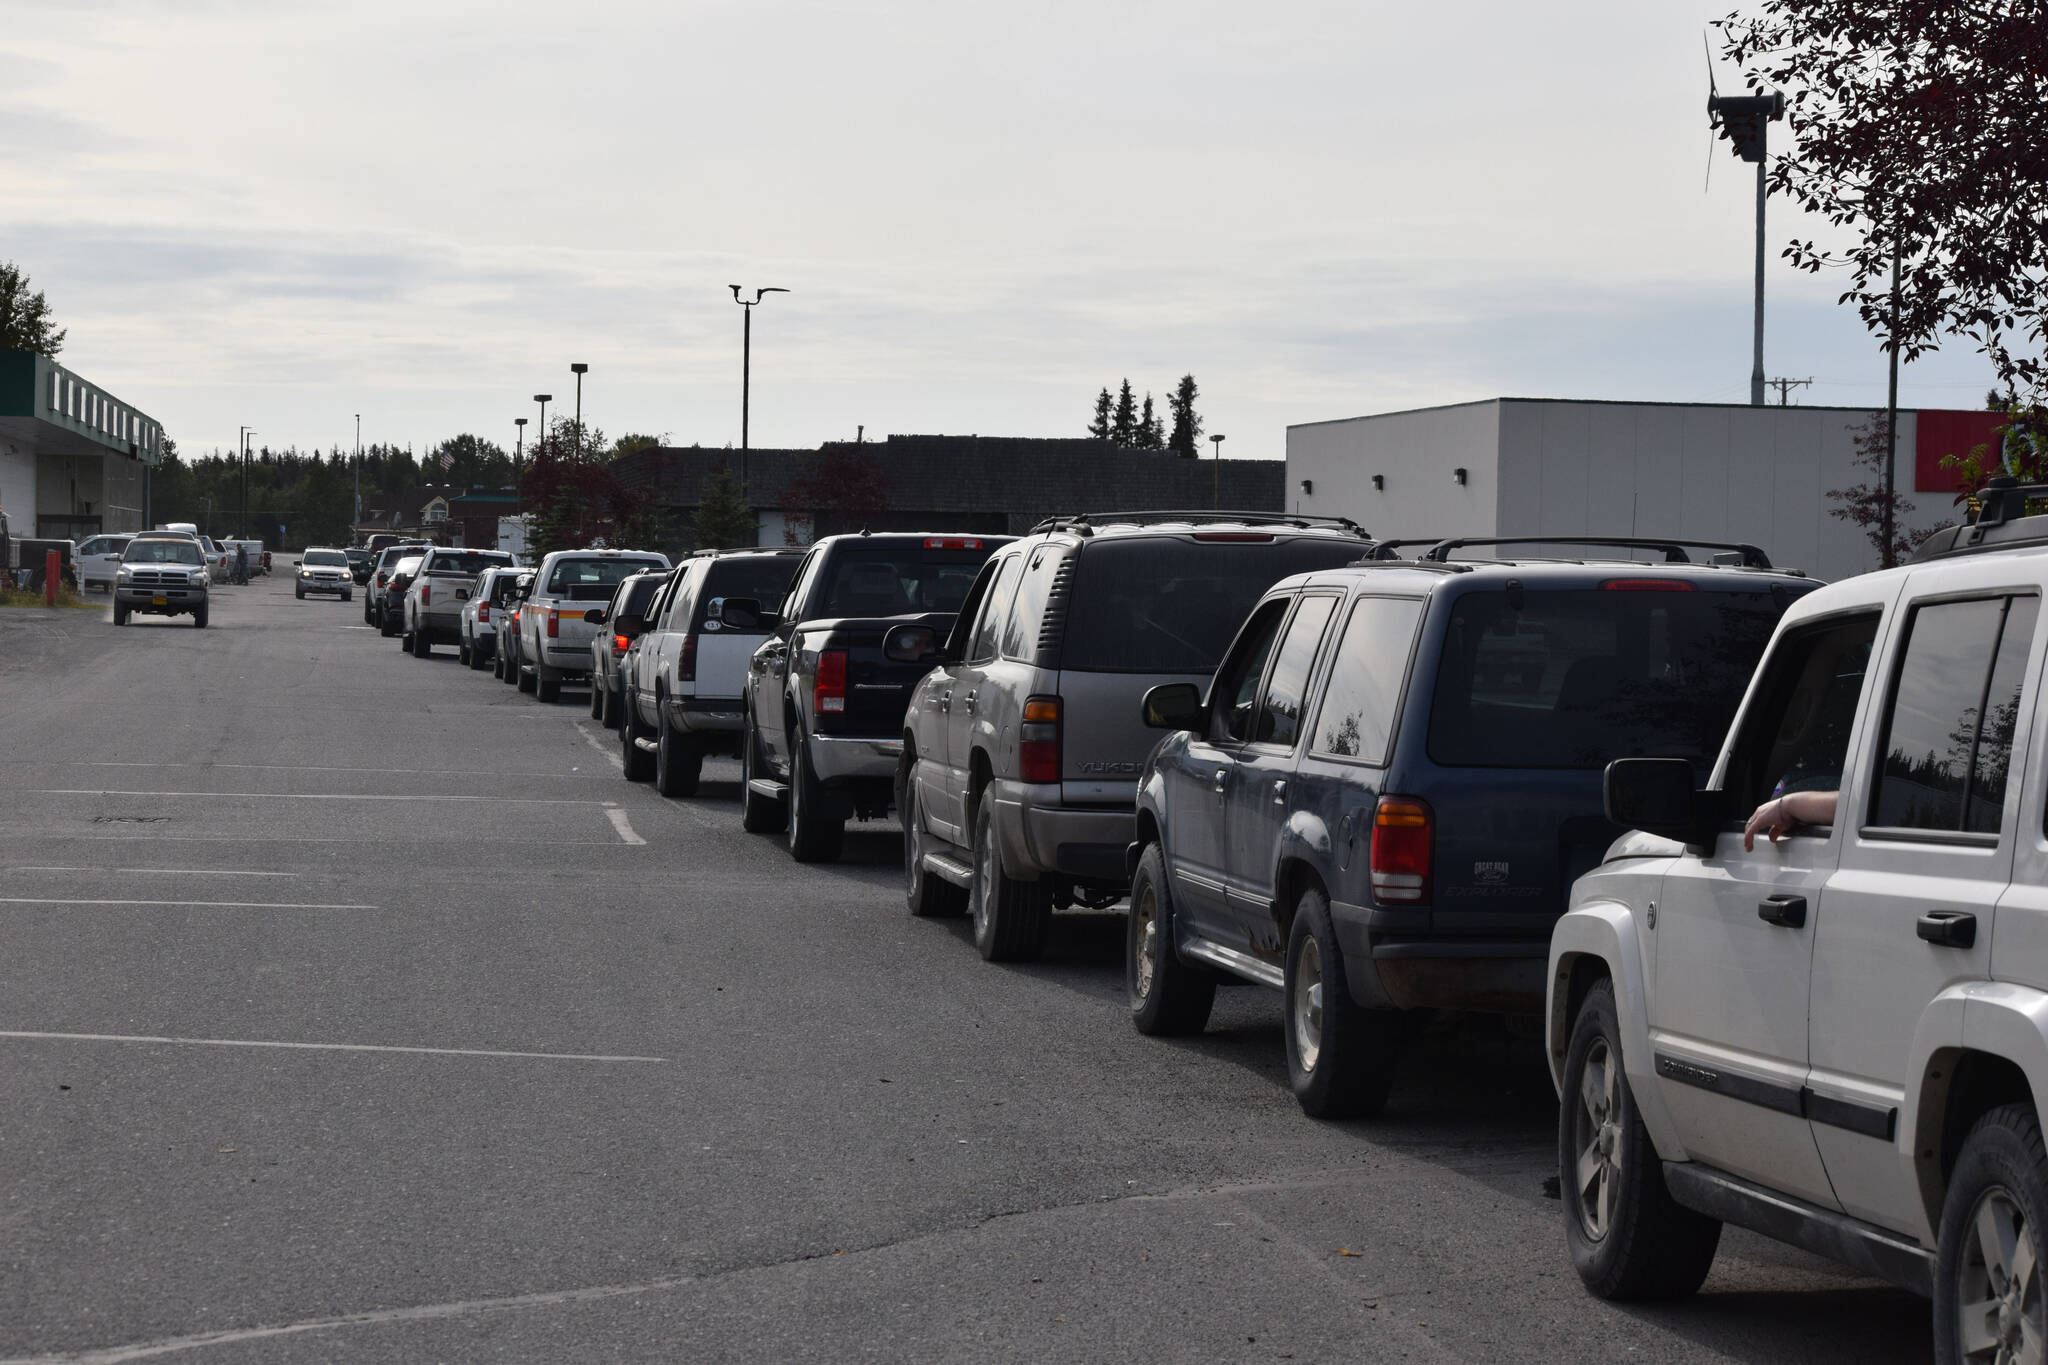 Cars line up outside of Capstone Clinic’s COVID-19 testing site in Kenai, Alaska on Tuesday, Sept. 7, 2021. The line extended through the Three Bears Grocery parking lot, and past the entrances to O’Reilly Auto Parts and Aspen Extended Stay Suites. Some said they waited for three and a half hours to get tested, and others said the line stretched down and around Walker Lane Tuesday morning. (Camille Botello/Peninsula Clarion)